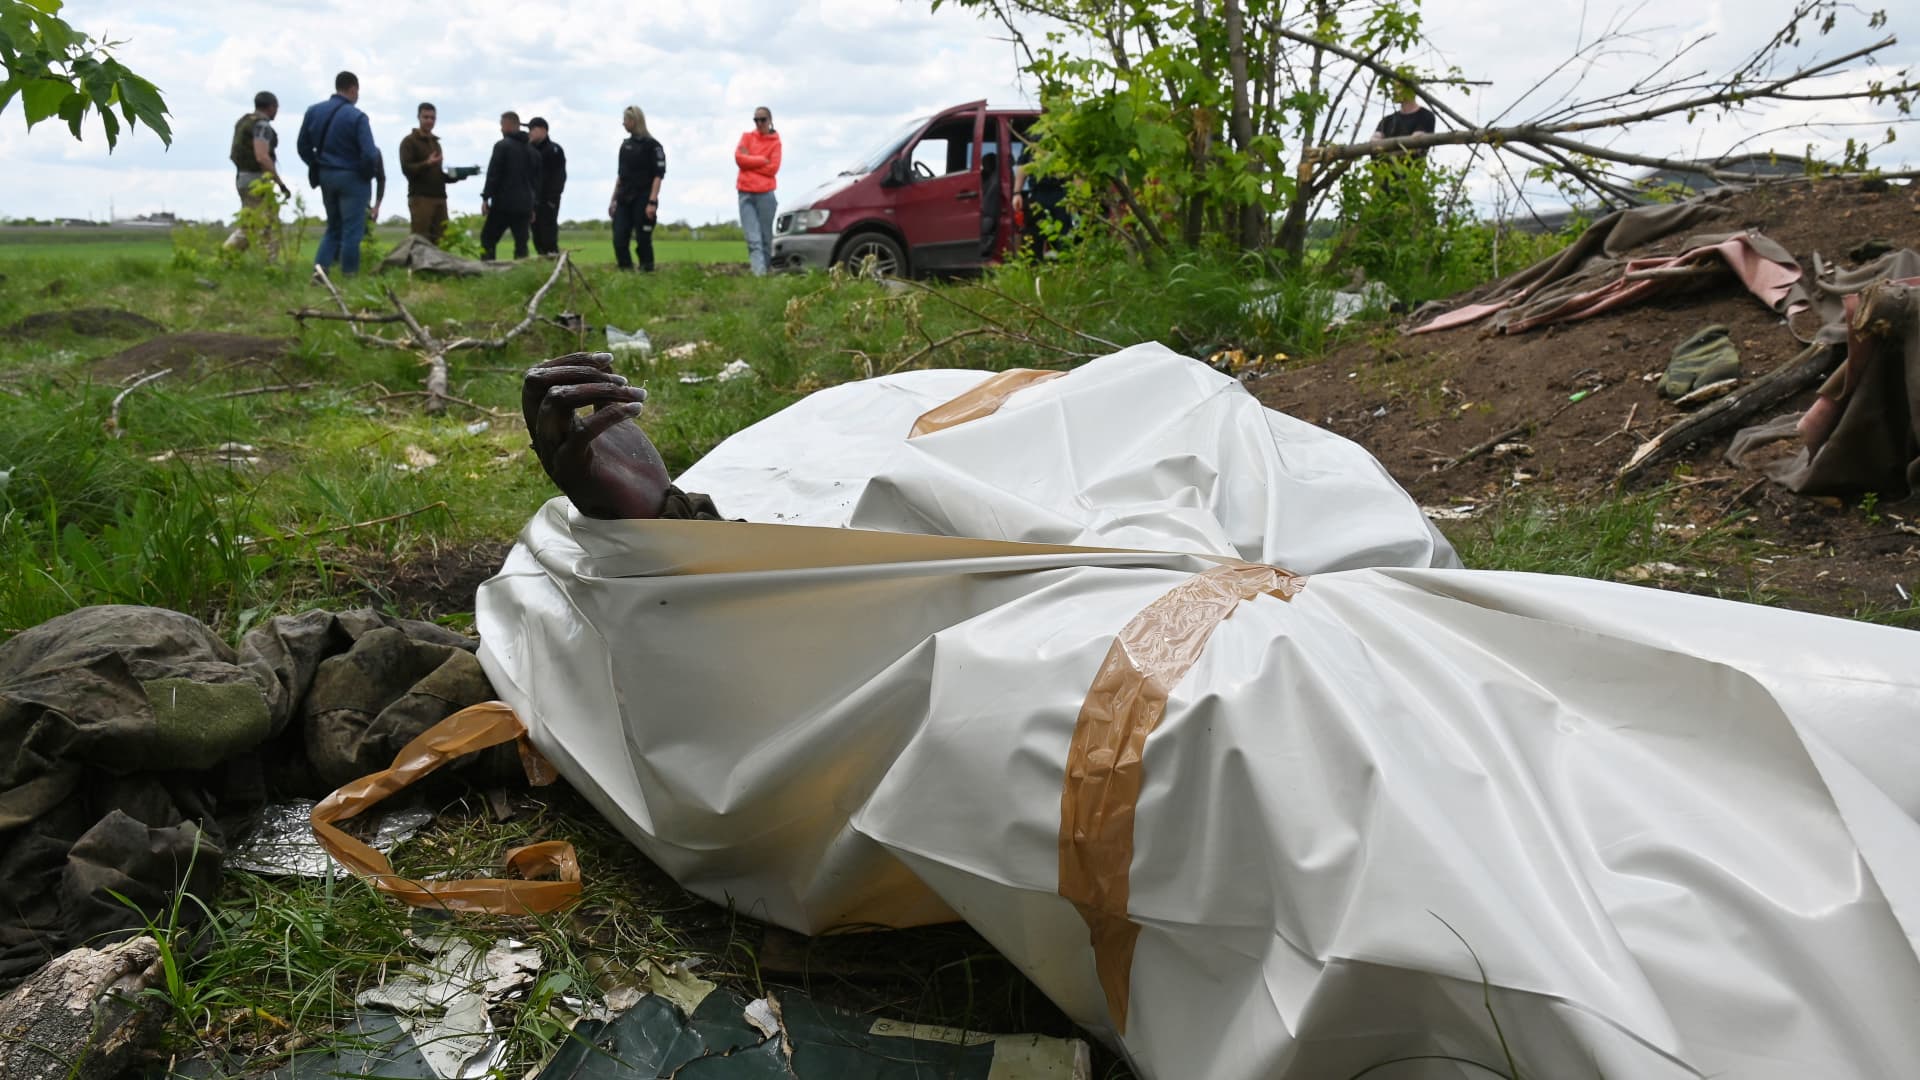 A picture shows a body bag as a Ukrainian police forensics team carry out the exhumation of bodies said to be Russian soldiers, outside the village of Mala Rogan, near Kharkiv, on May 18, 2022, amid Russia's military invasion launched on Ukraine.